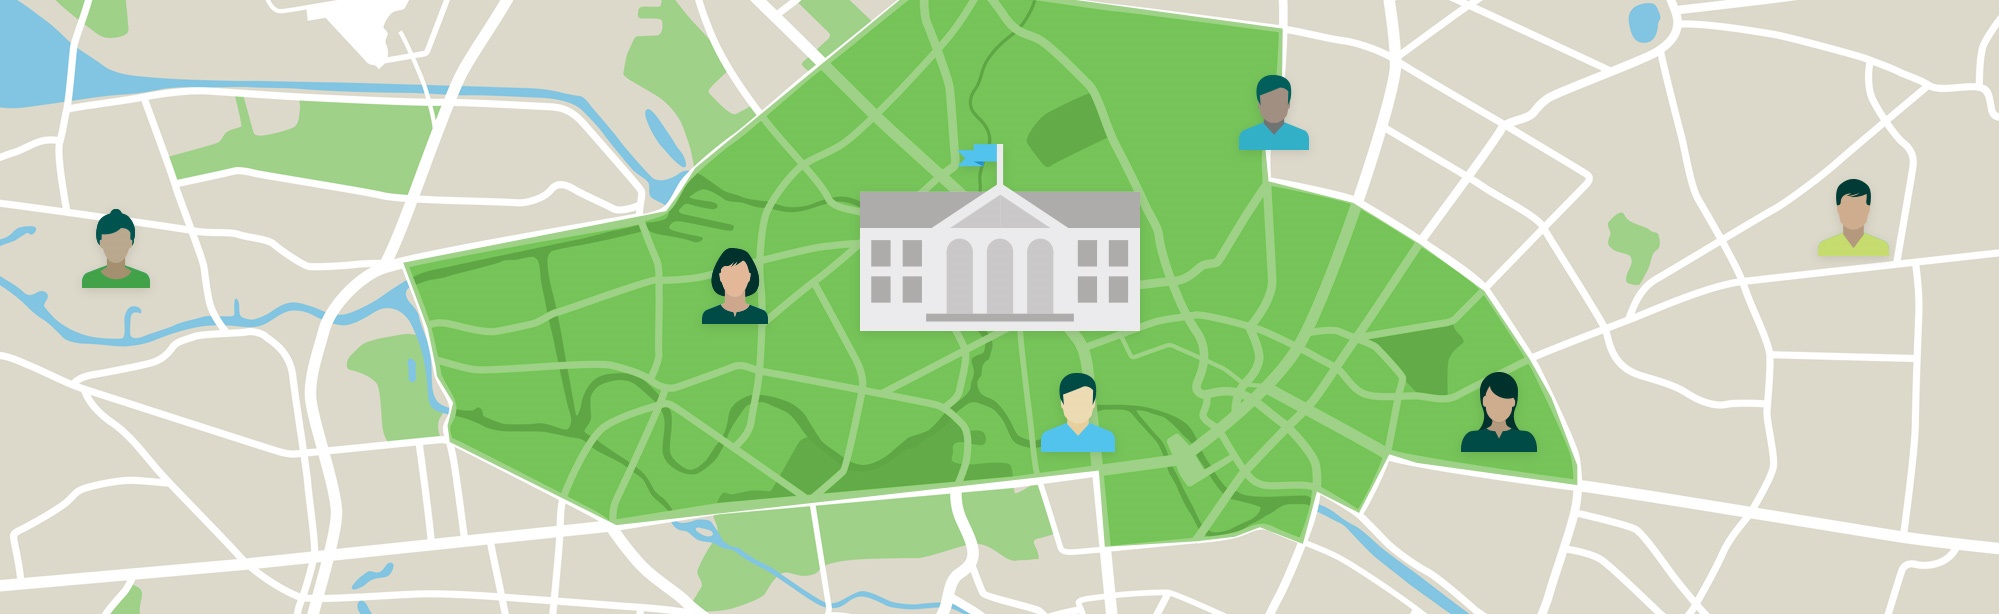 map of a campus with students in close proximity